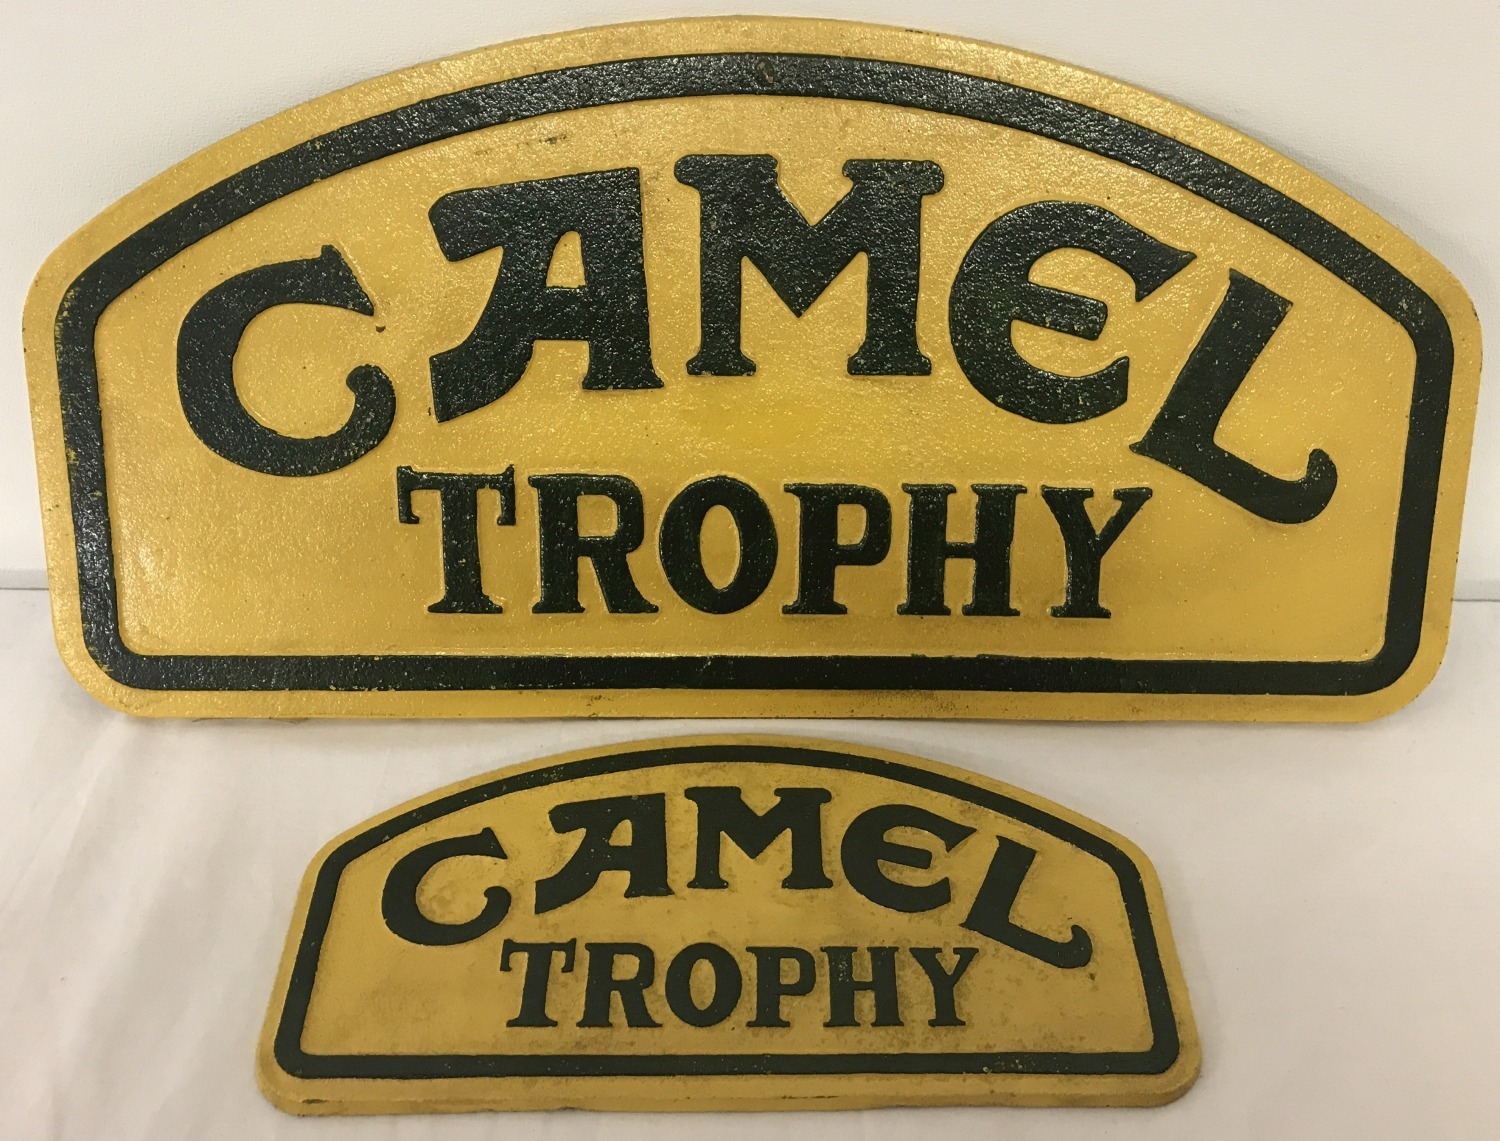 2 painted cast Iron dome topped wall hanging "Camel Trophy" signs.